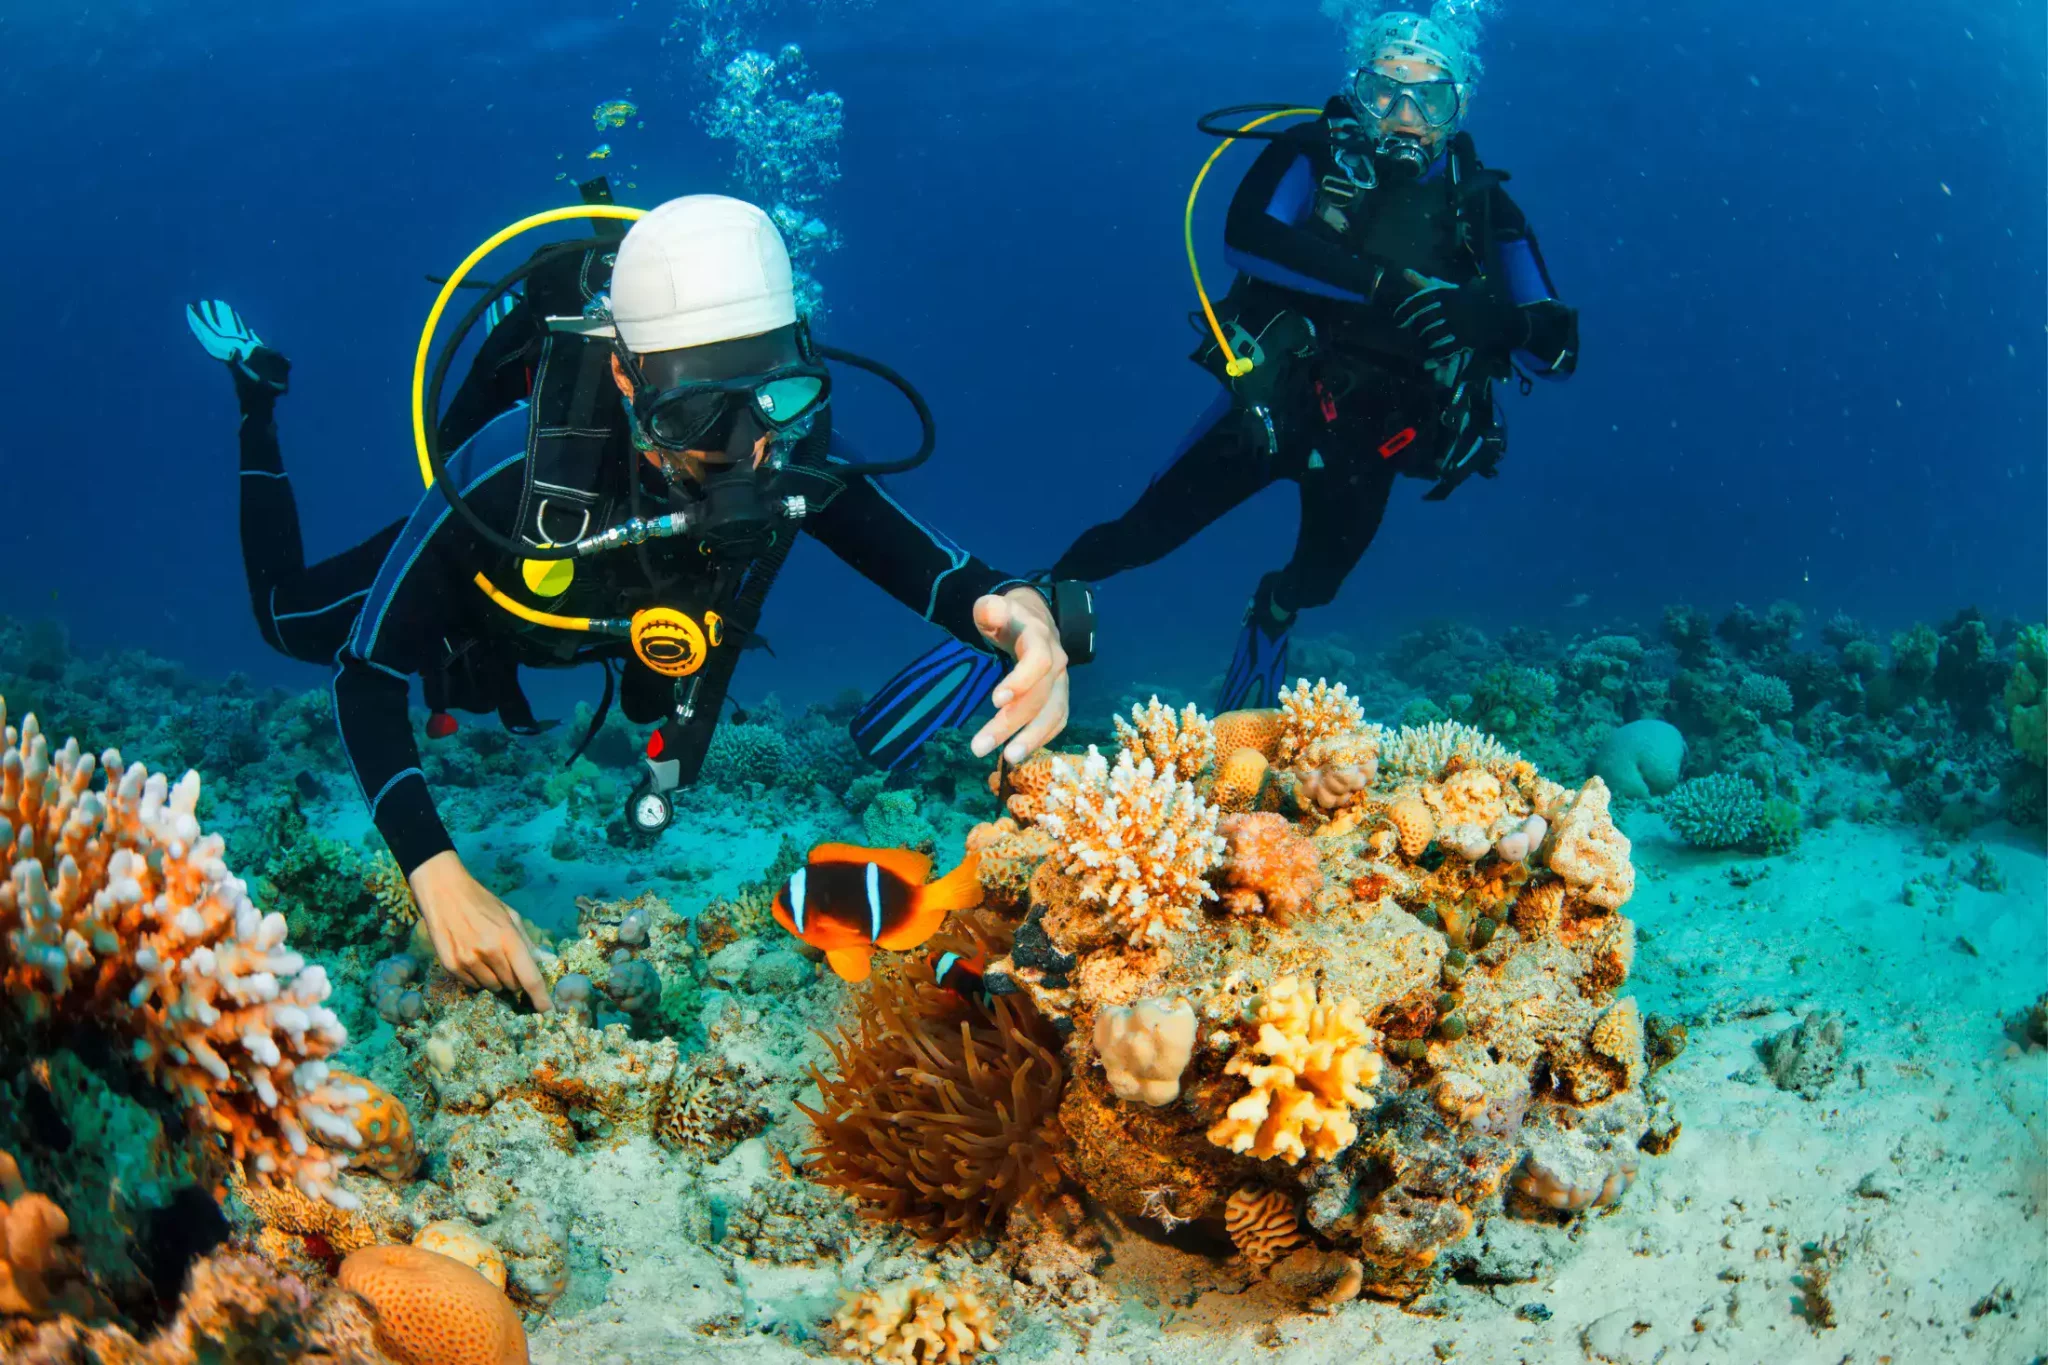 Two scuba divers exploring the vibrant coral reefs, with a curious fish swimming close by, in the clear waters of the Seychelles.